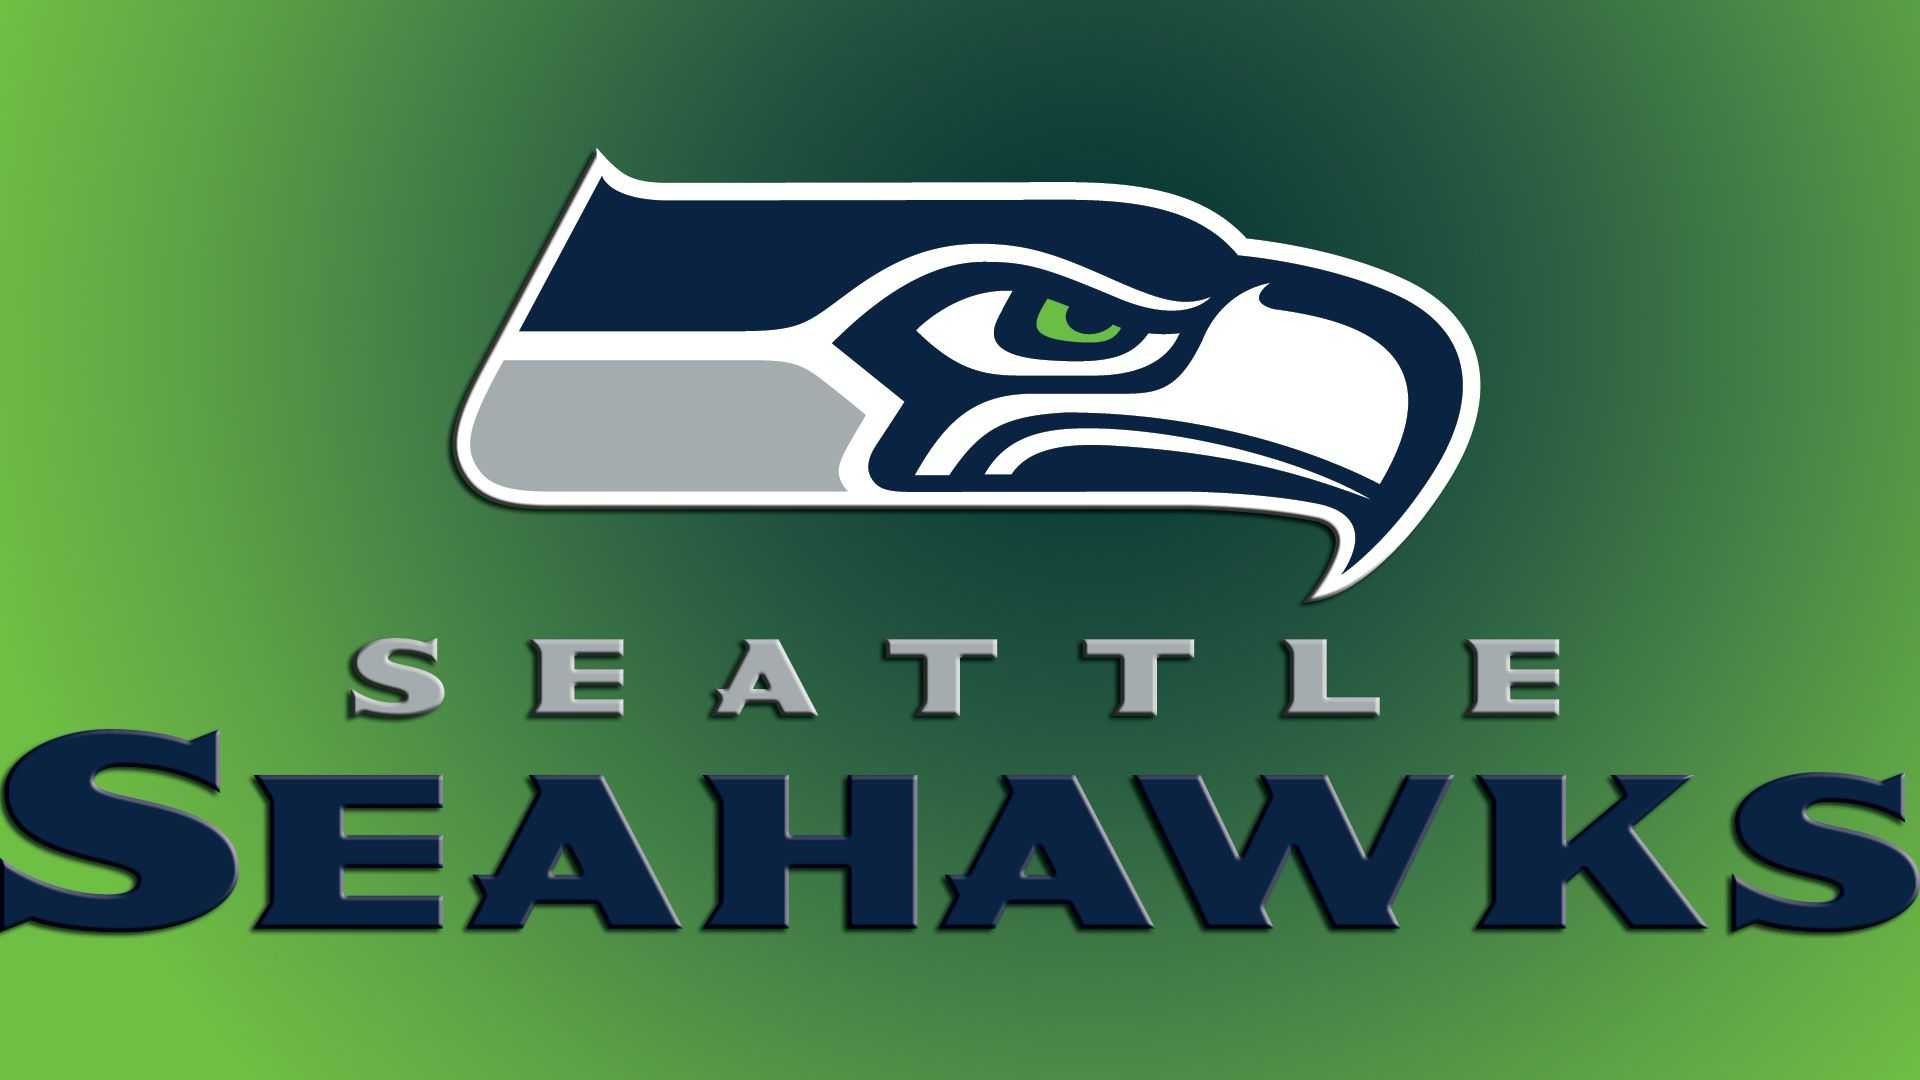 1920x1080 HD Cool Seattle Seahawks Logo Wallpaper in Sports. Download this